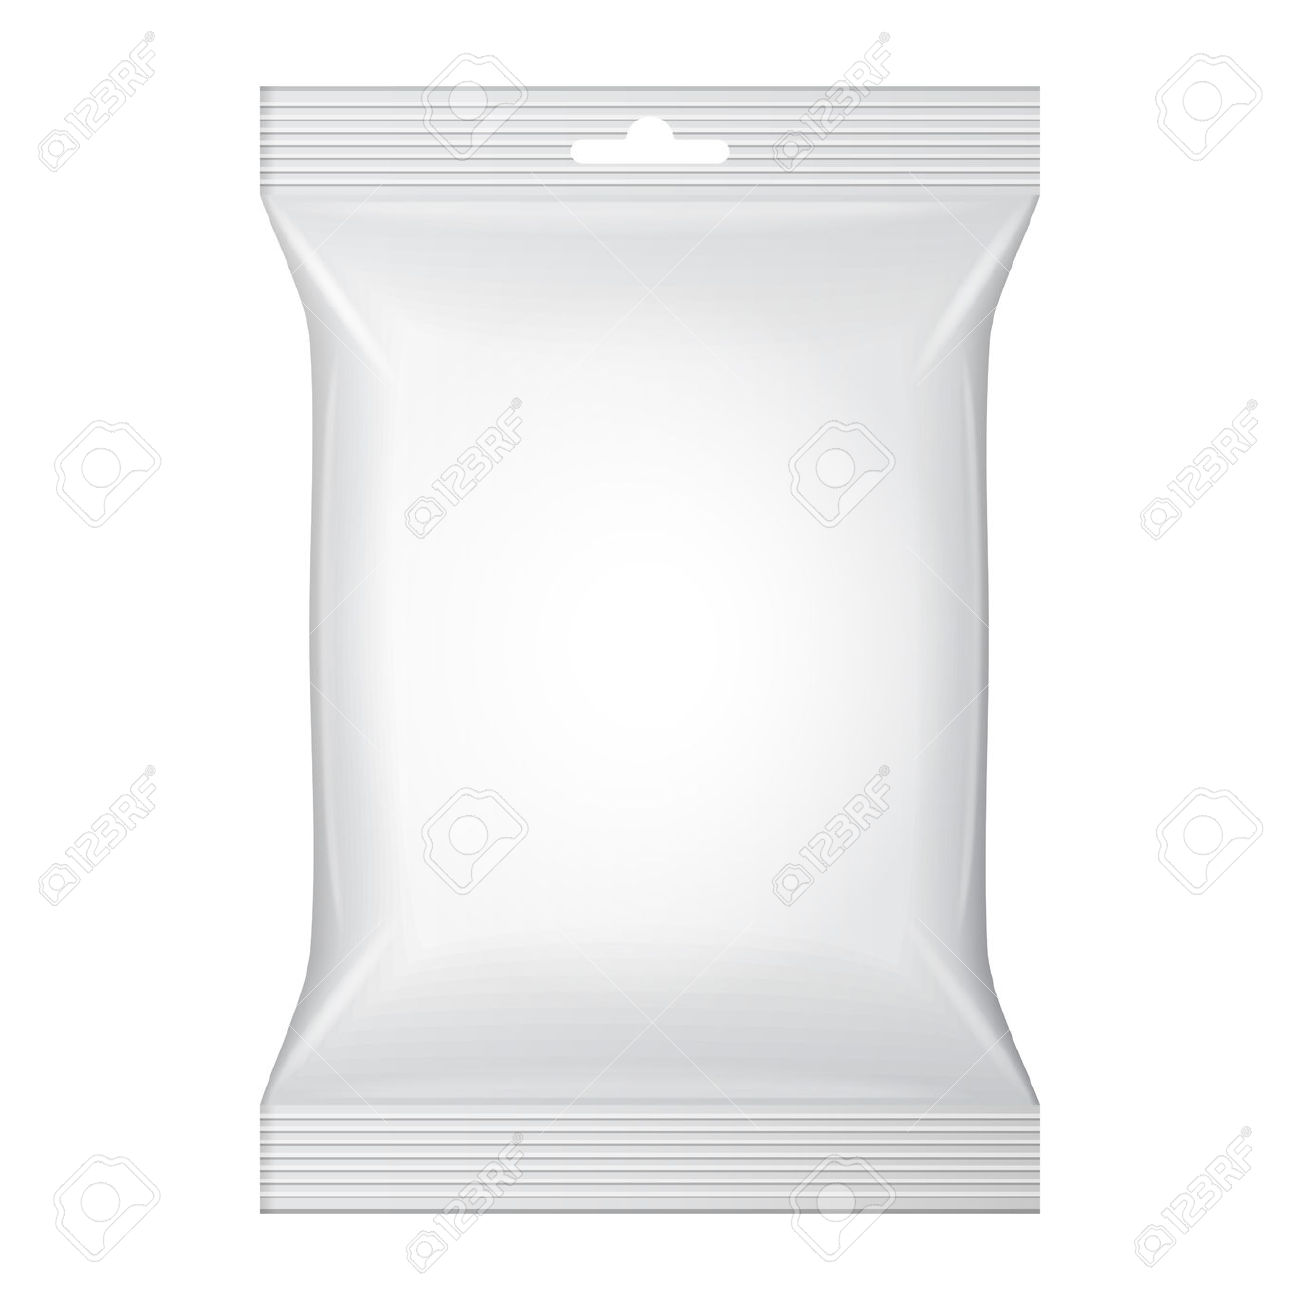 Plastic packaging clipart 20 free Cliparts | Download images on ...